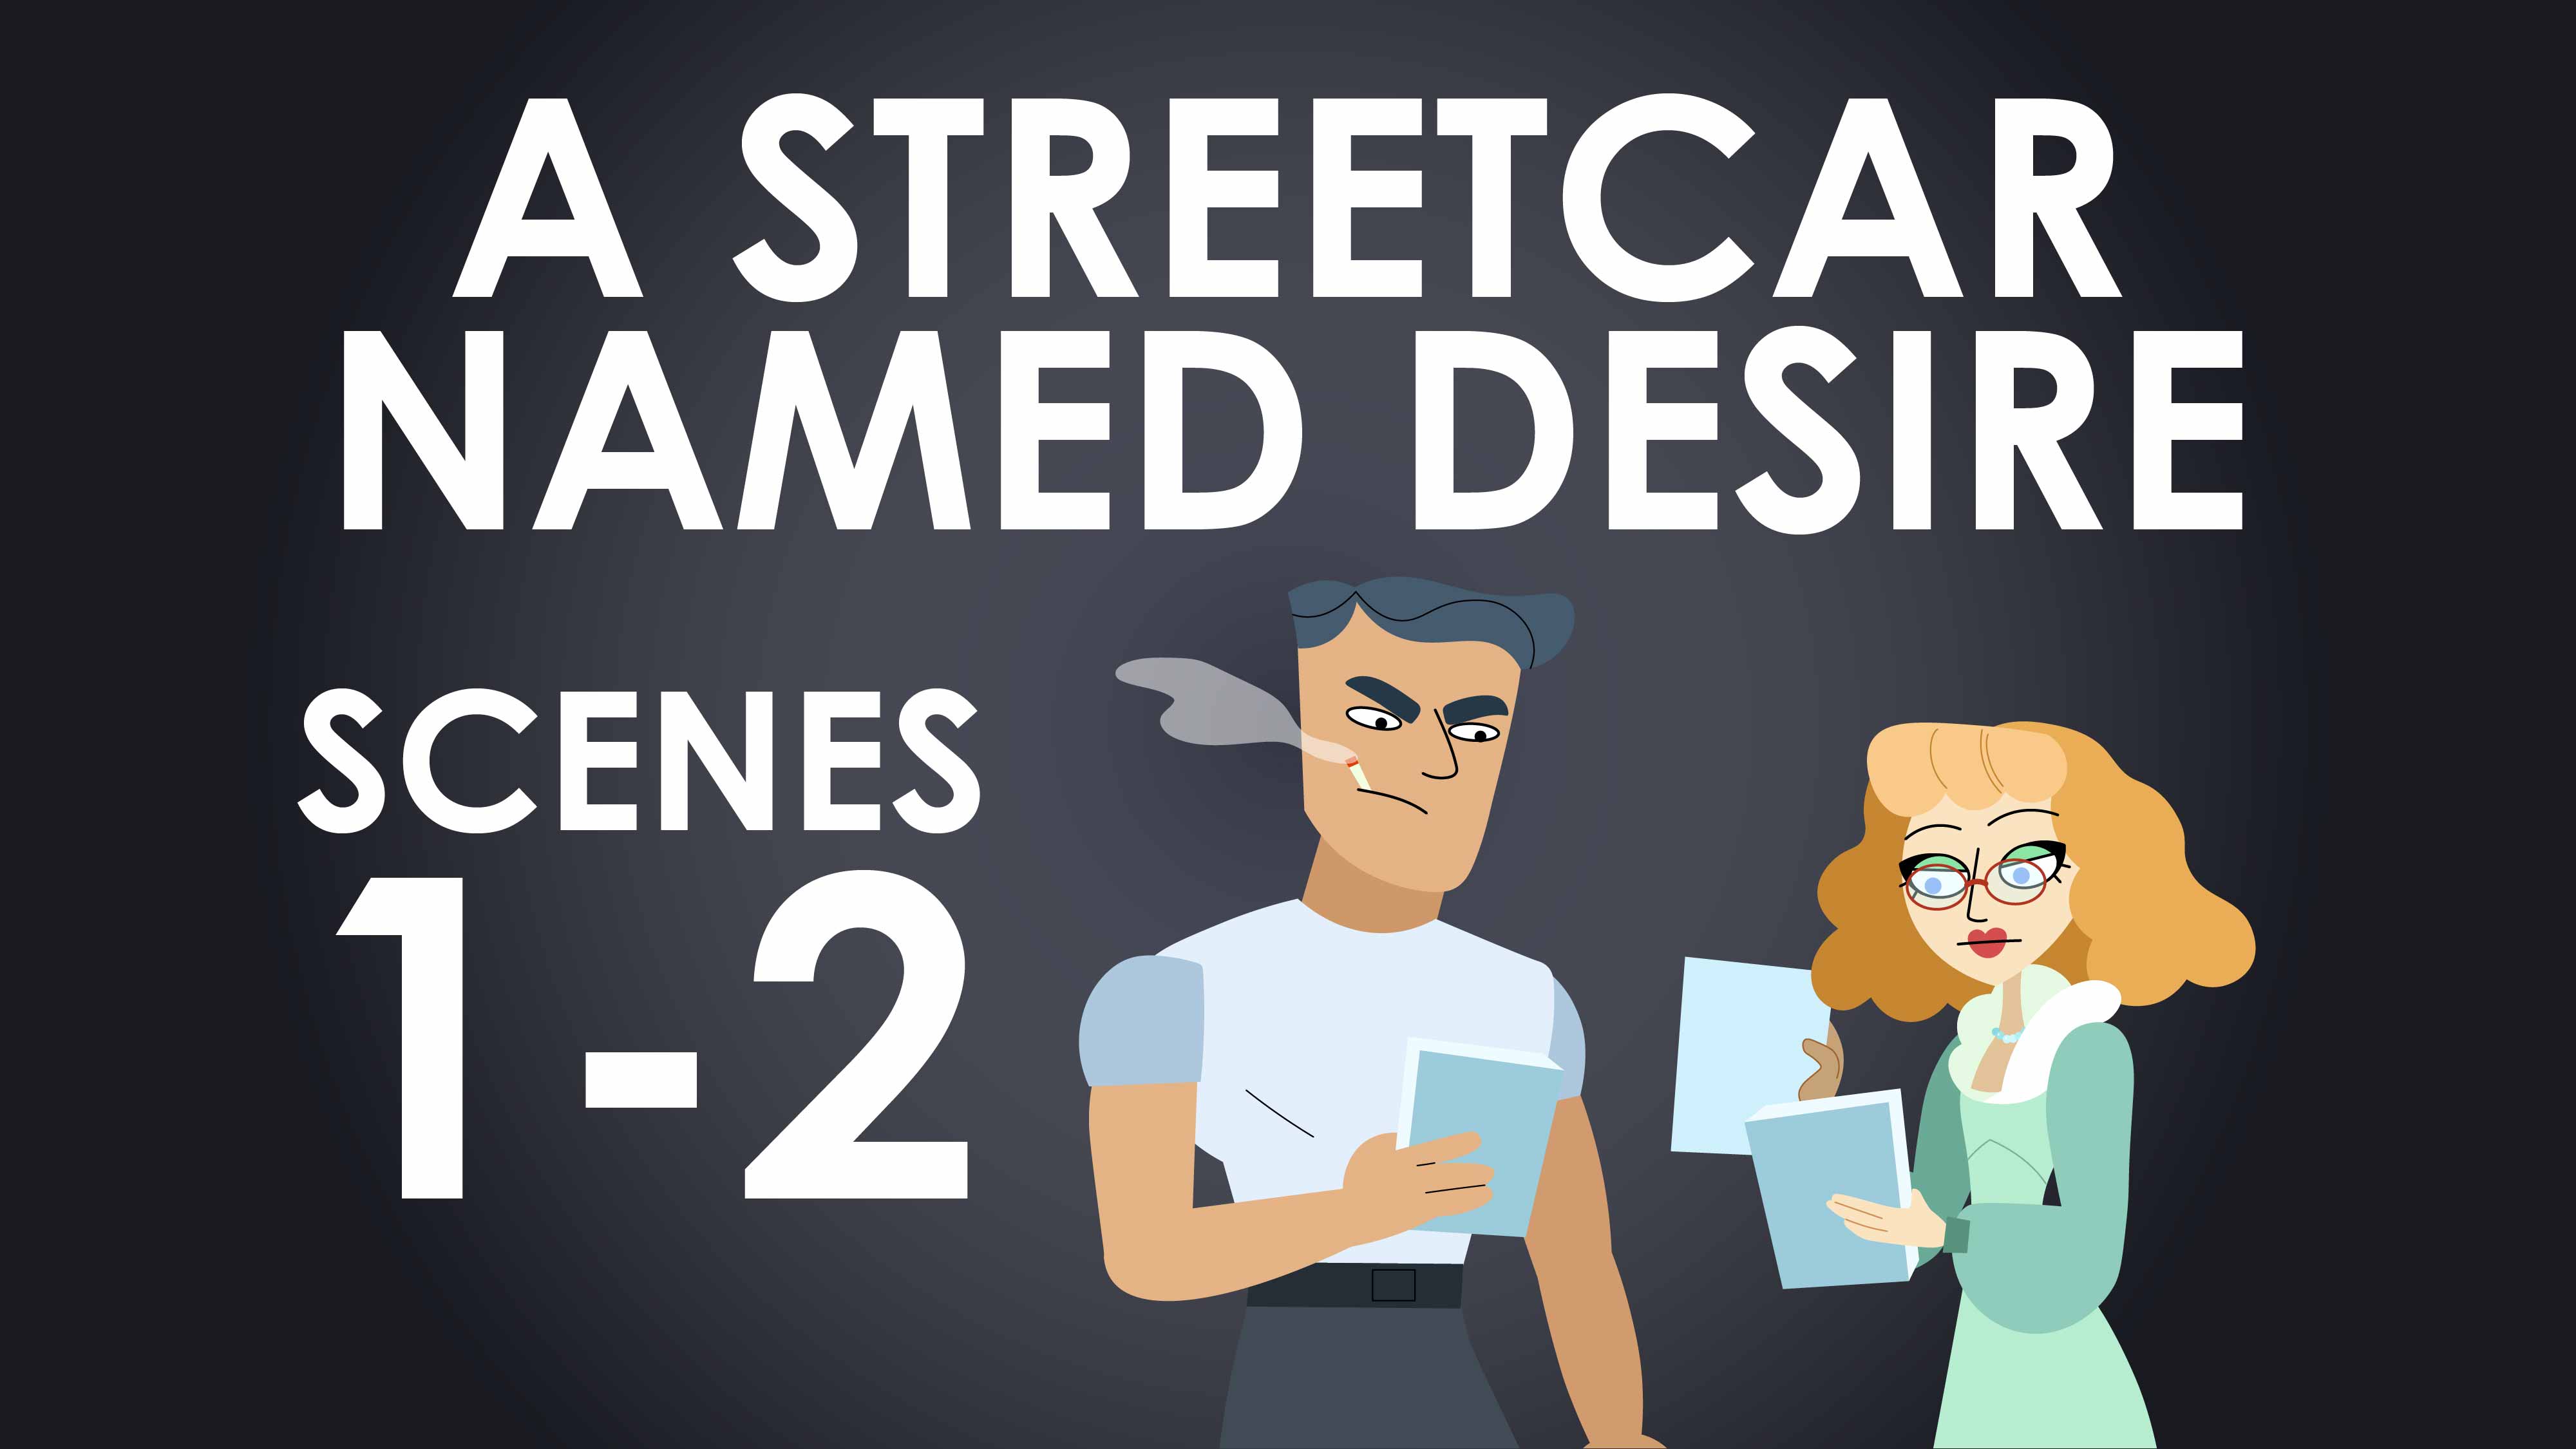 A Streetcar Named Desire	- Tennessee Williams - Scenes 1-2 Summary - Destroying Drama Series